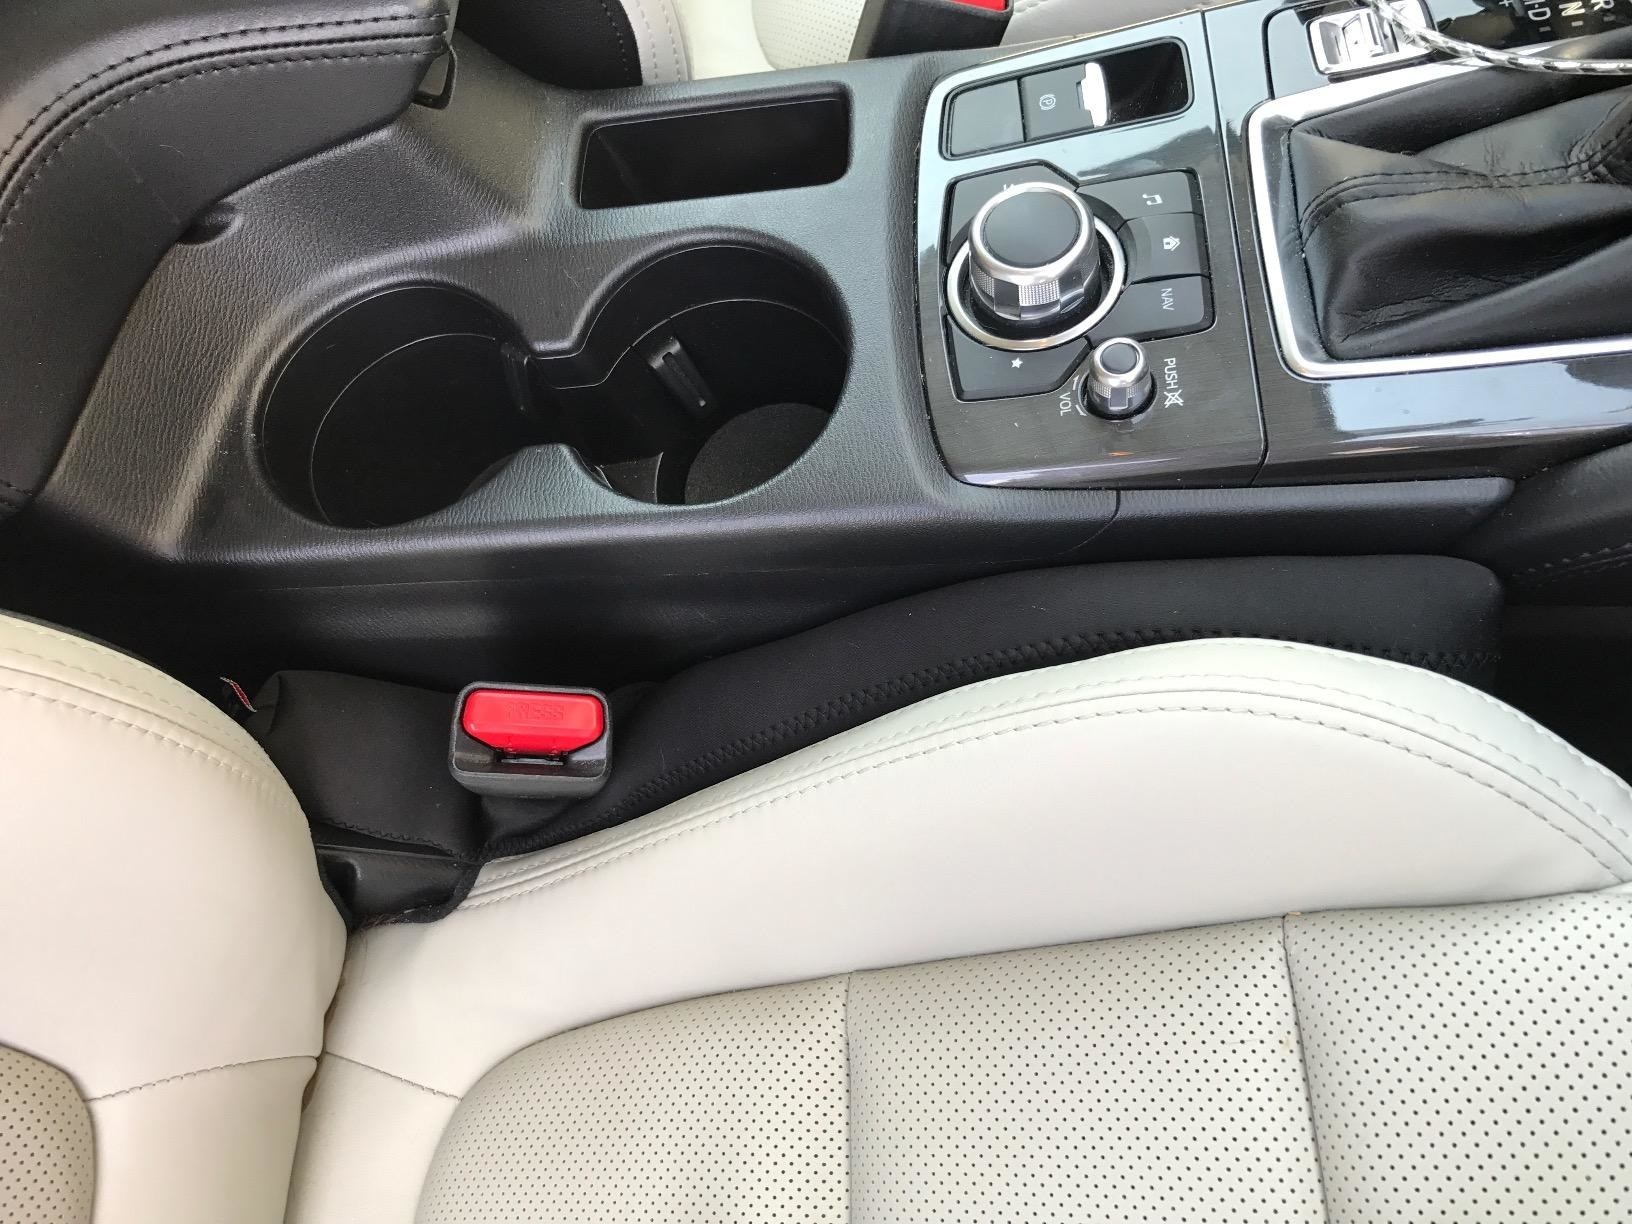 The black insert between the center console and the latch plate of the seatbelt